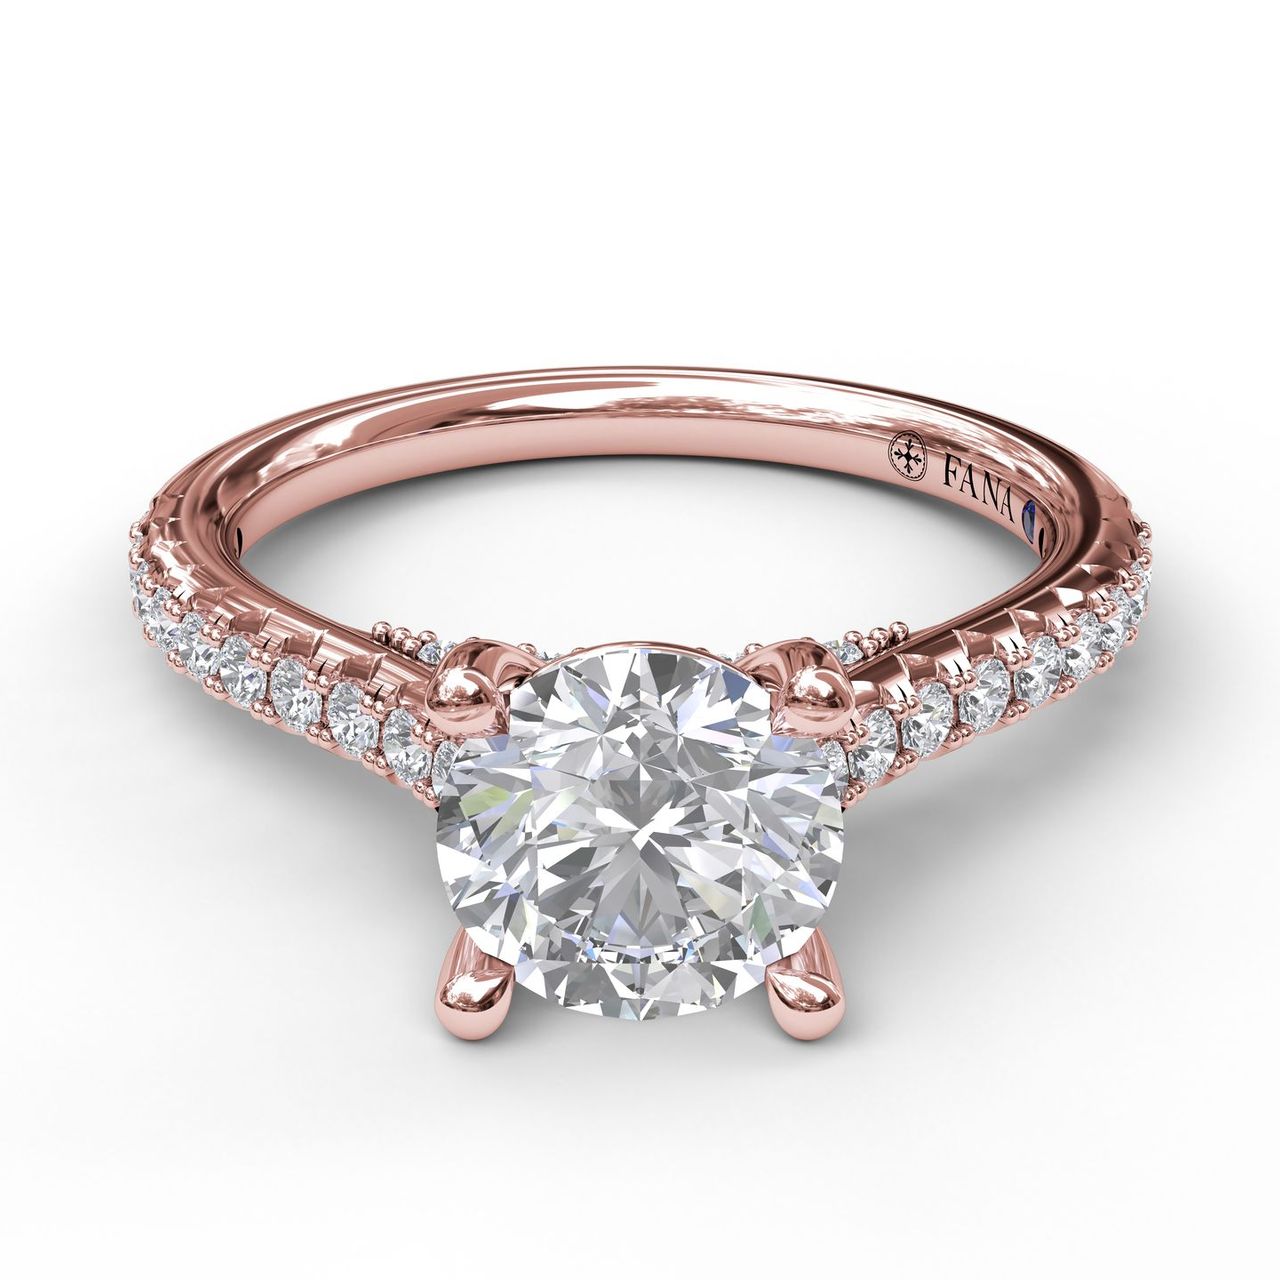 75 Unique engagement rings with Glamorous Charm - Gorgeous engagement ring  #engagementring #engaged… | Diamond wedding bands, Wedding rings, Unique engagement  rings